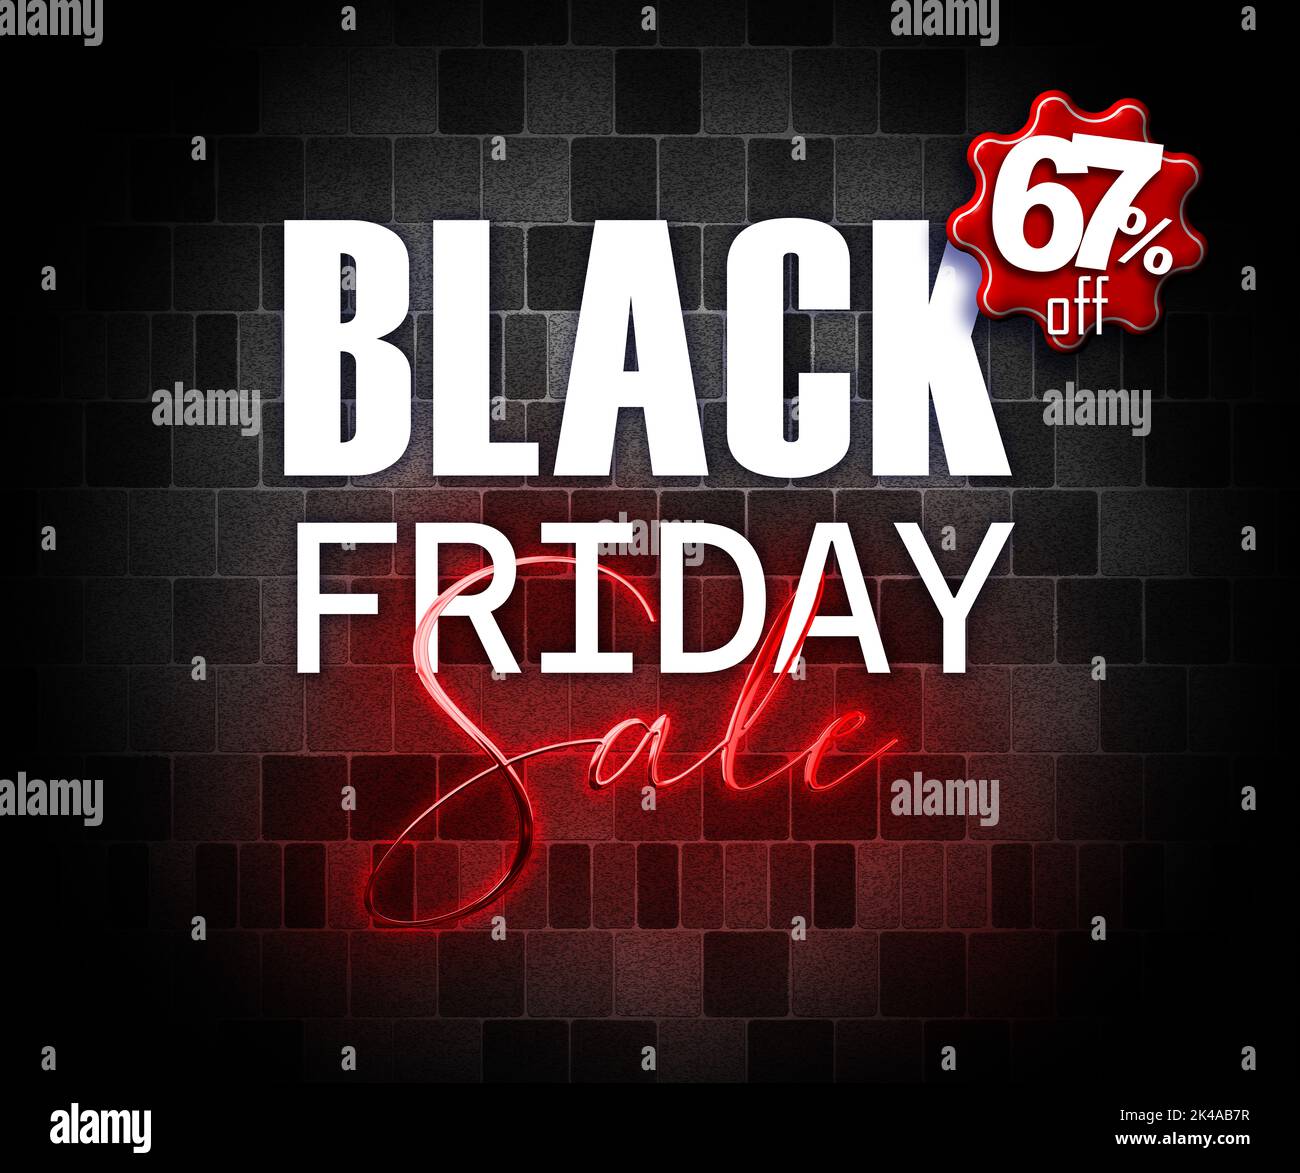 illustration with 3d elements black friday promotion banner 67 percent off sales increase Stock Photo